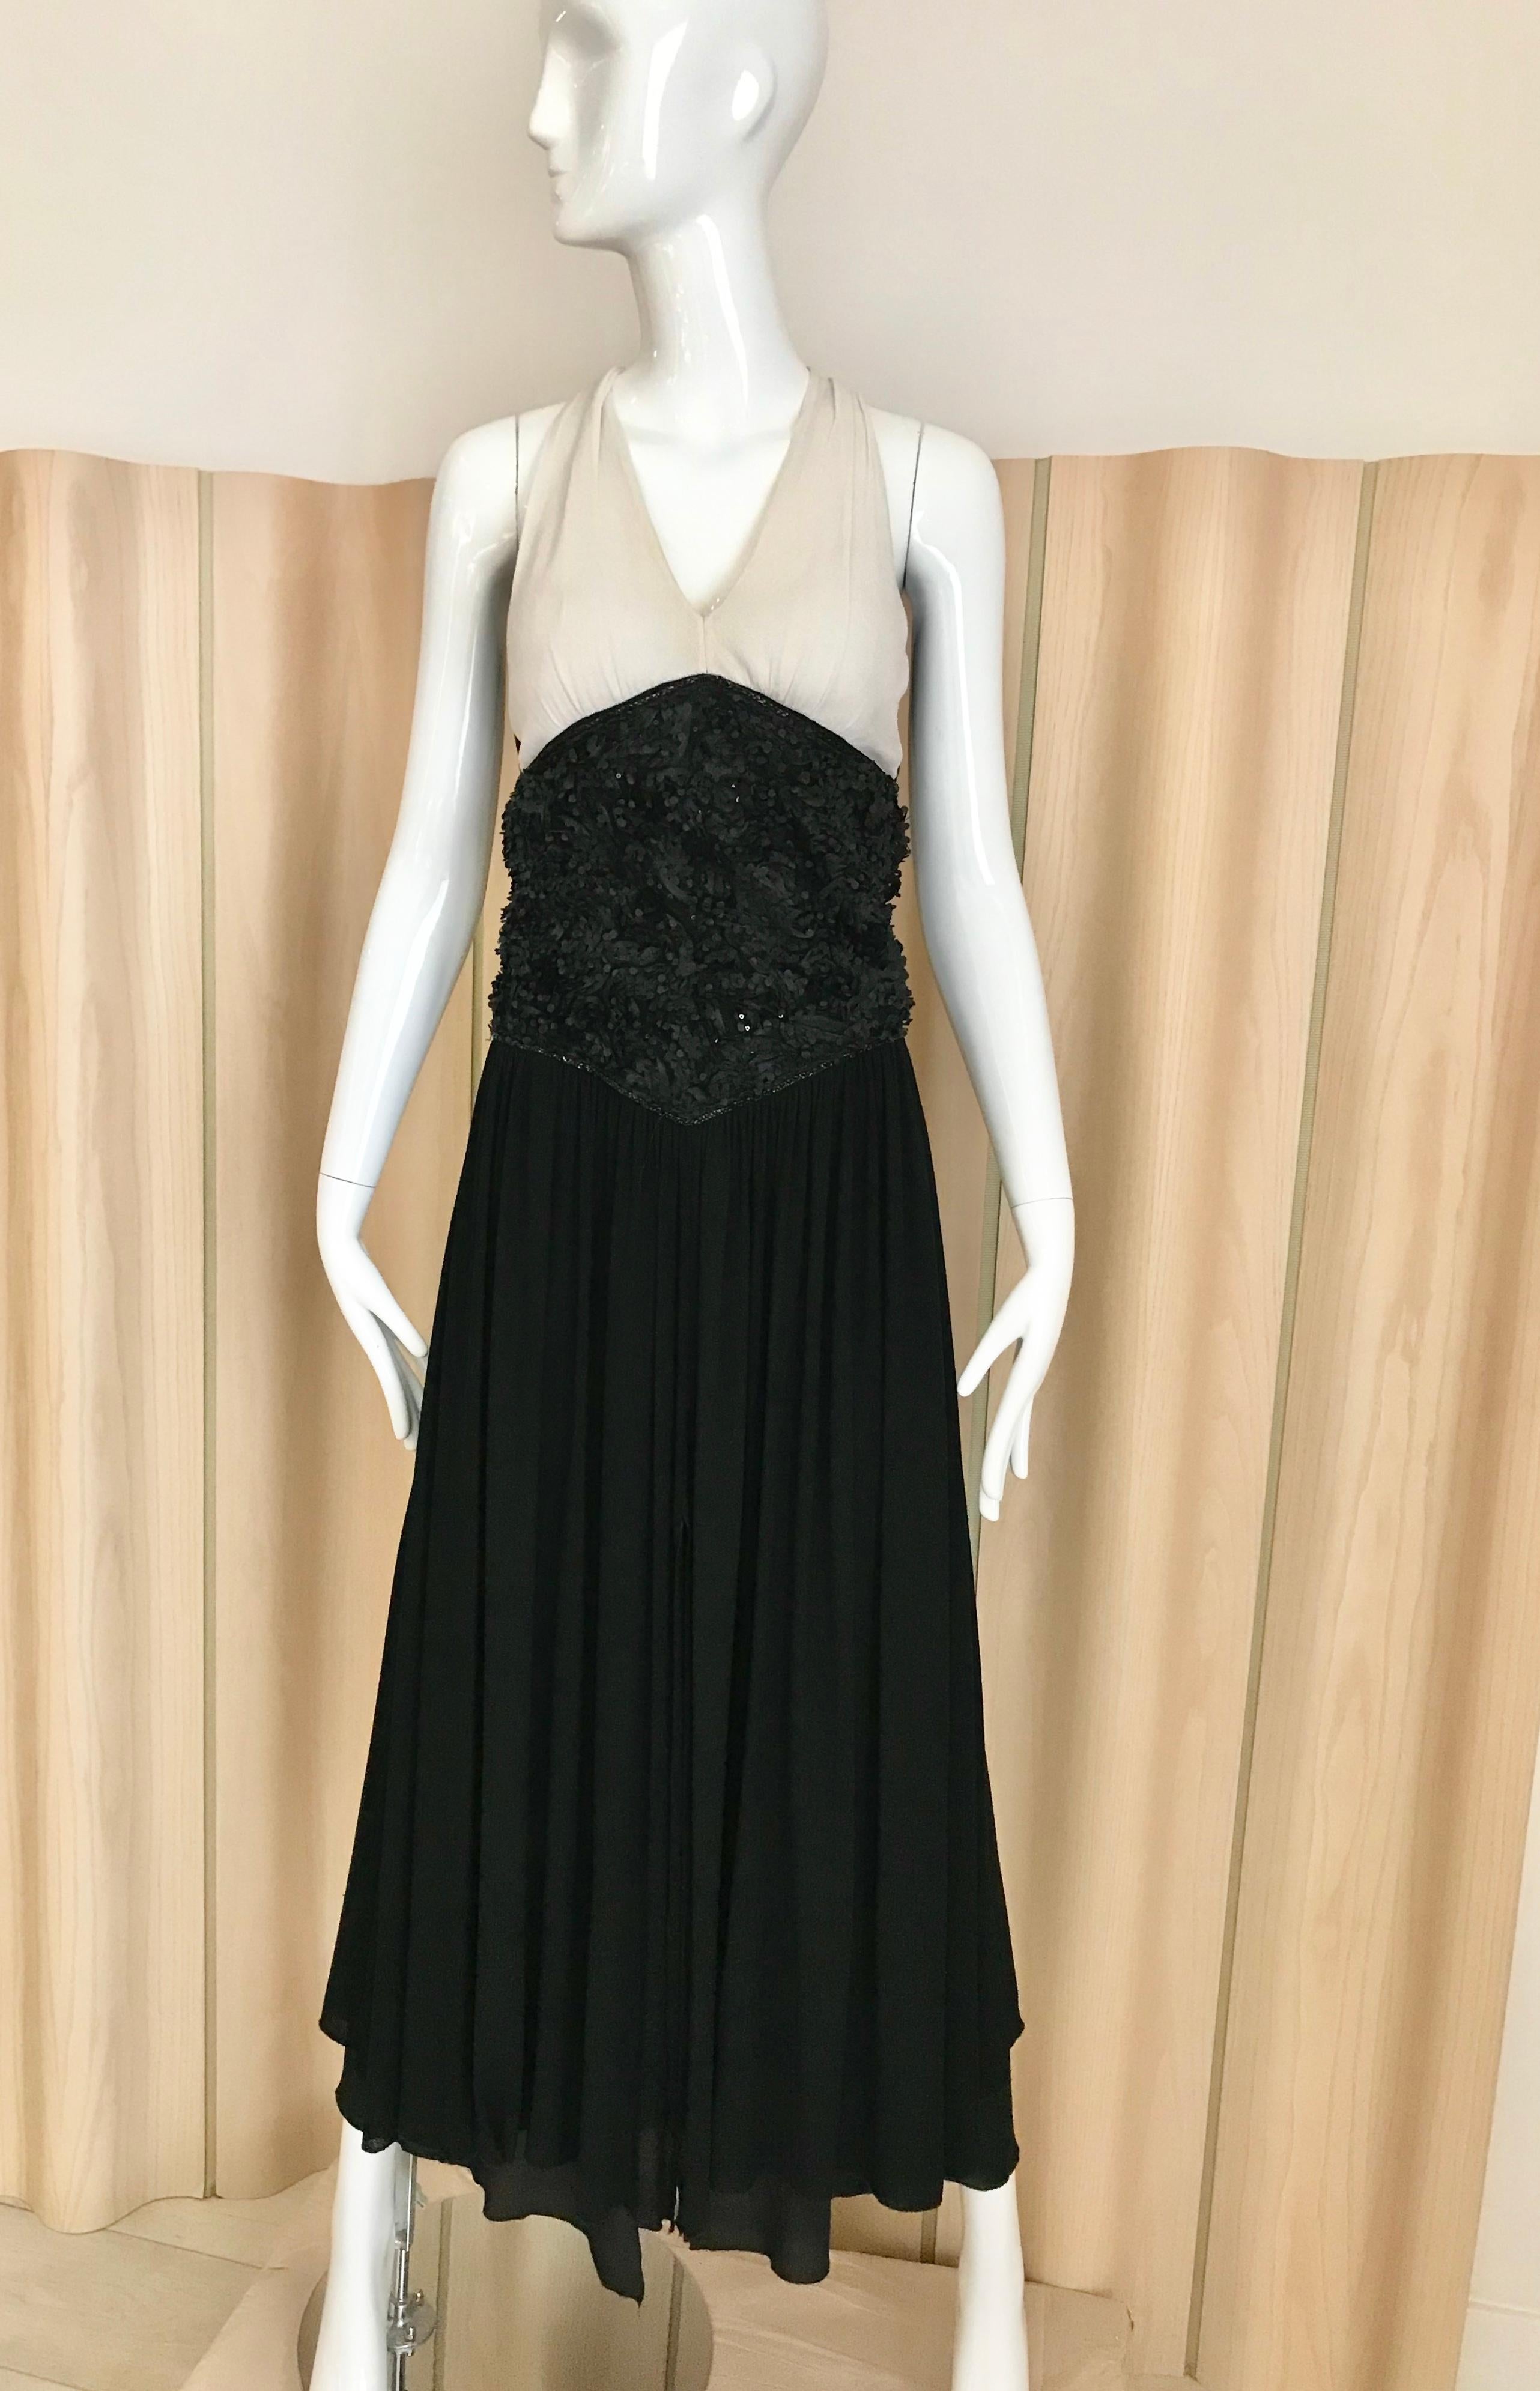 1990s CHANEL black and white V neck halter maxi dress.
Size: 4 / small
Bust 34” / Waist : 26” Hip: open/ Dress length: 55”